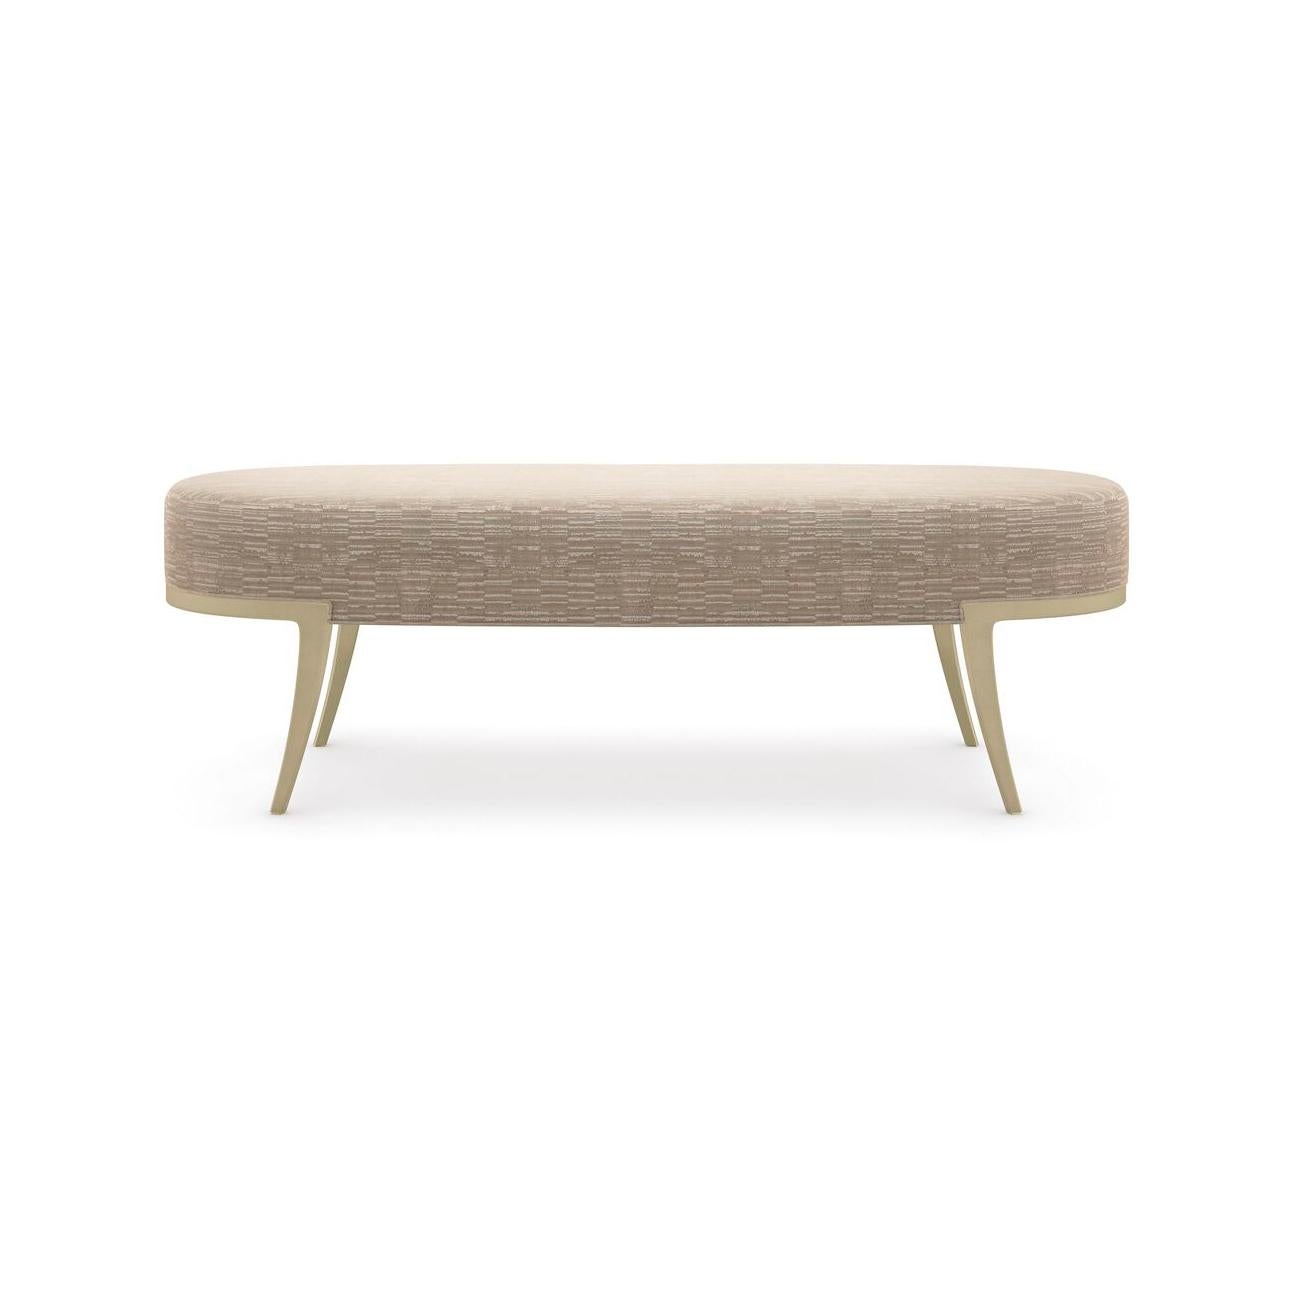 An alluring accent with tactile appeal, this bedroom bench makes a striking impression in a metallic, Belgian cut velvet. Its classic oval shape is beautifully balanced by curved metal legs in a Whisper of Gold. Makes a perfect complement to the end